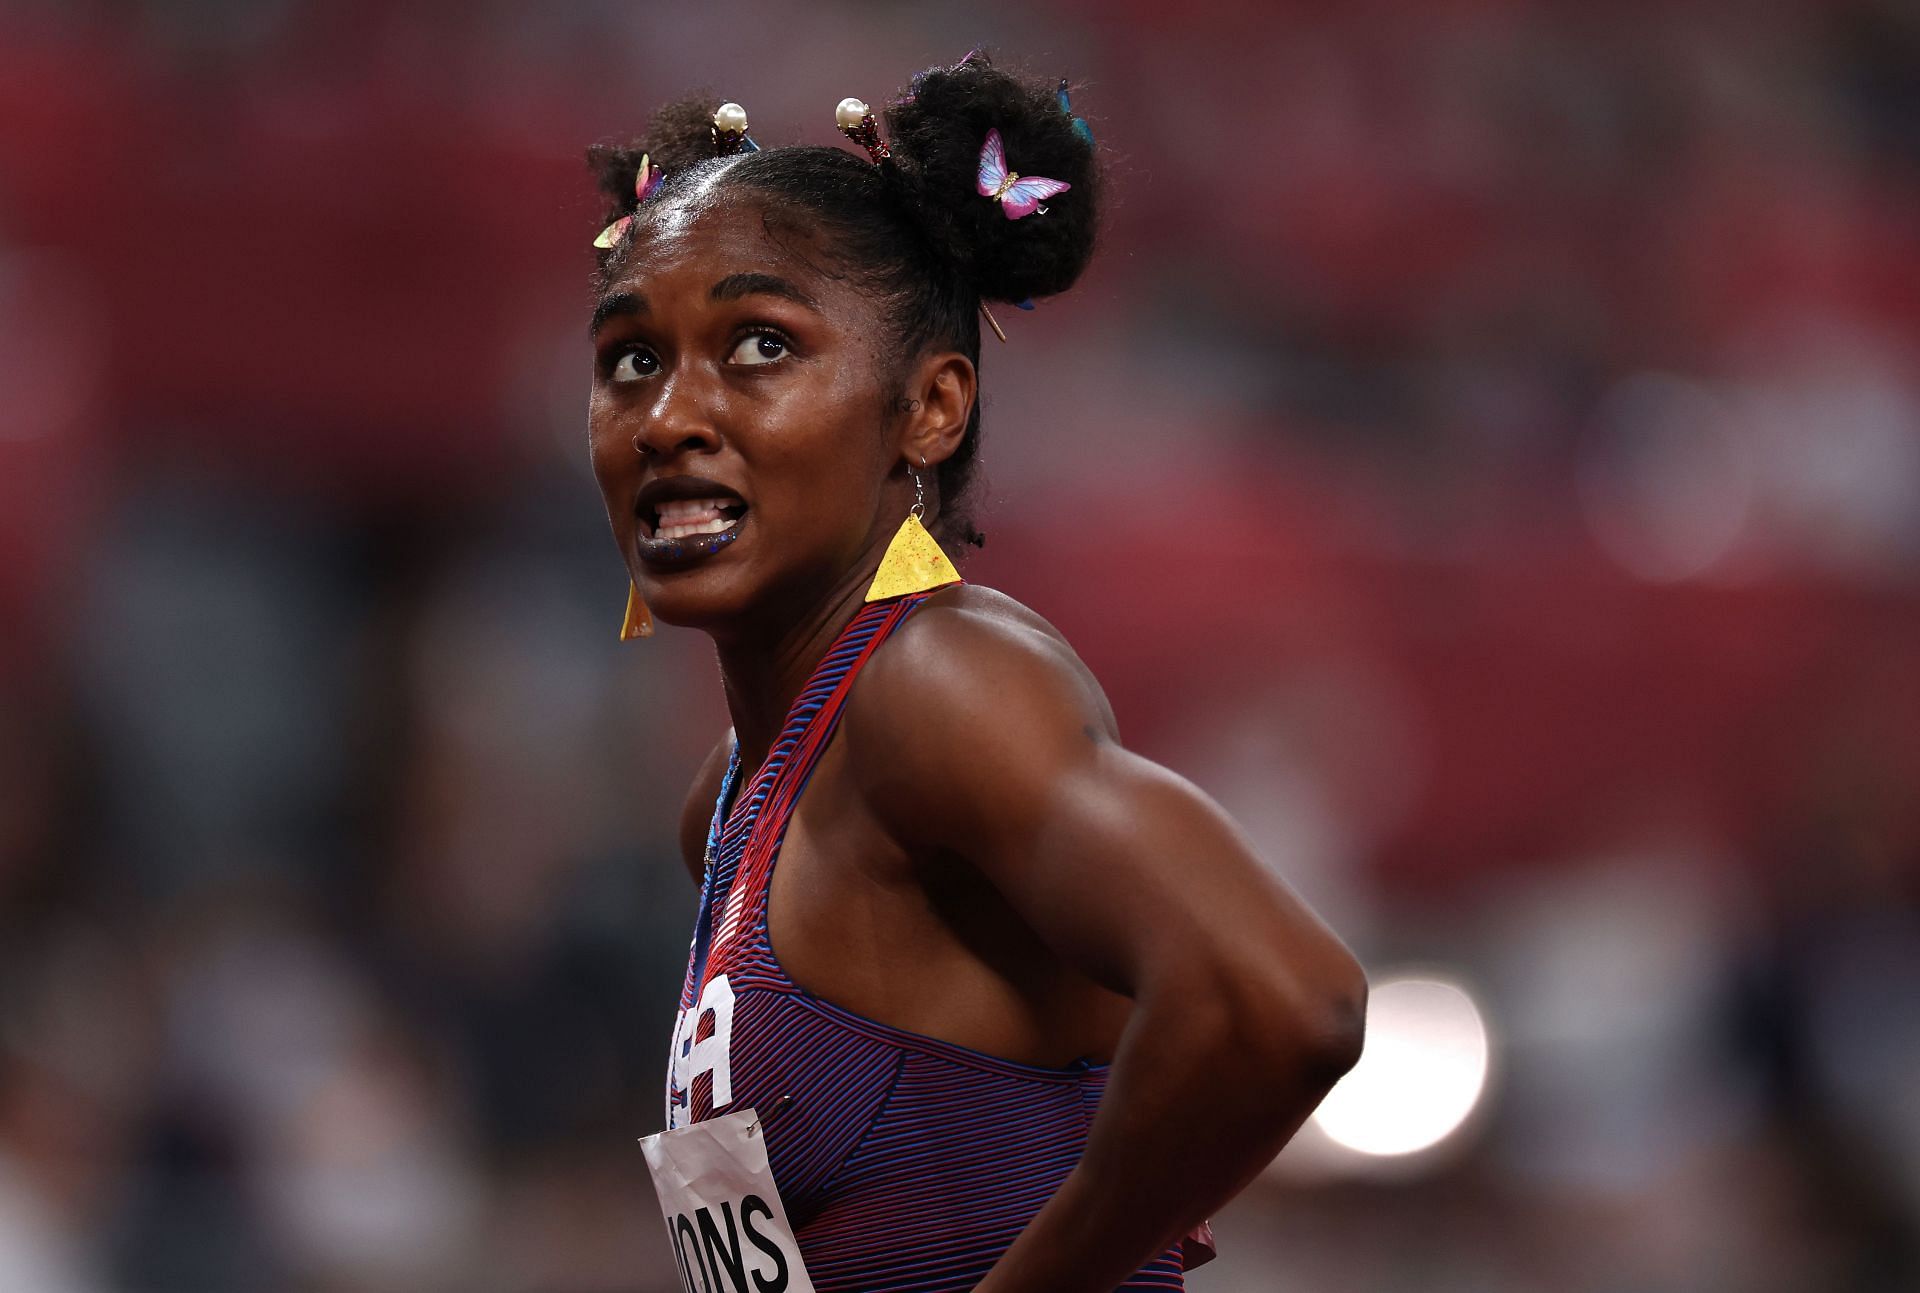 Christina Clemons reacts after competing in the Women&#039;s 100m Hurdles Semi-Final at the Tokyo 2020 Olympic Games in Tokyo, Japan.